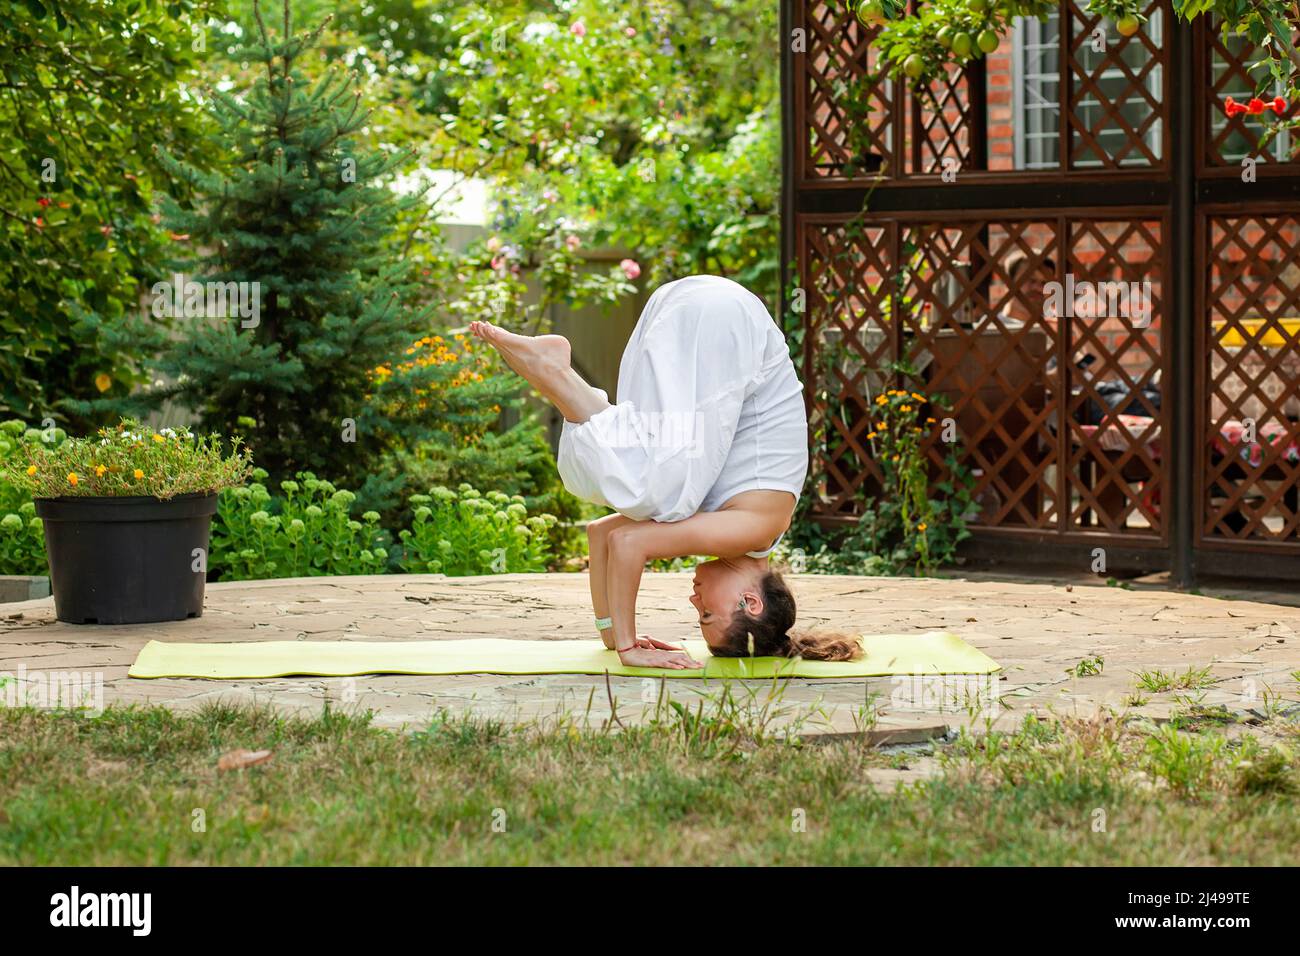 Young woman practices yoga in courtyard of a country house. Headstand - Ardha Salamba Shirshasana Stock Photo